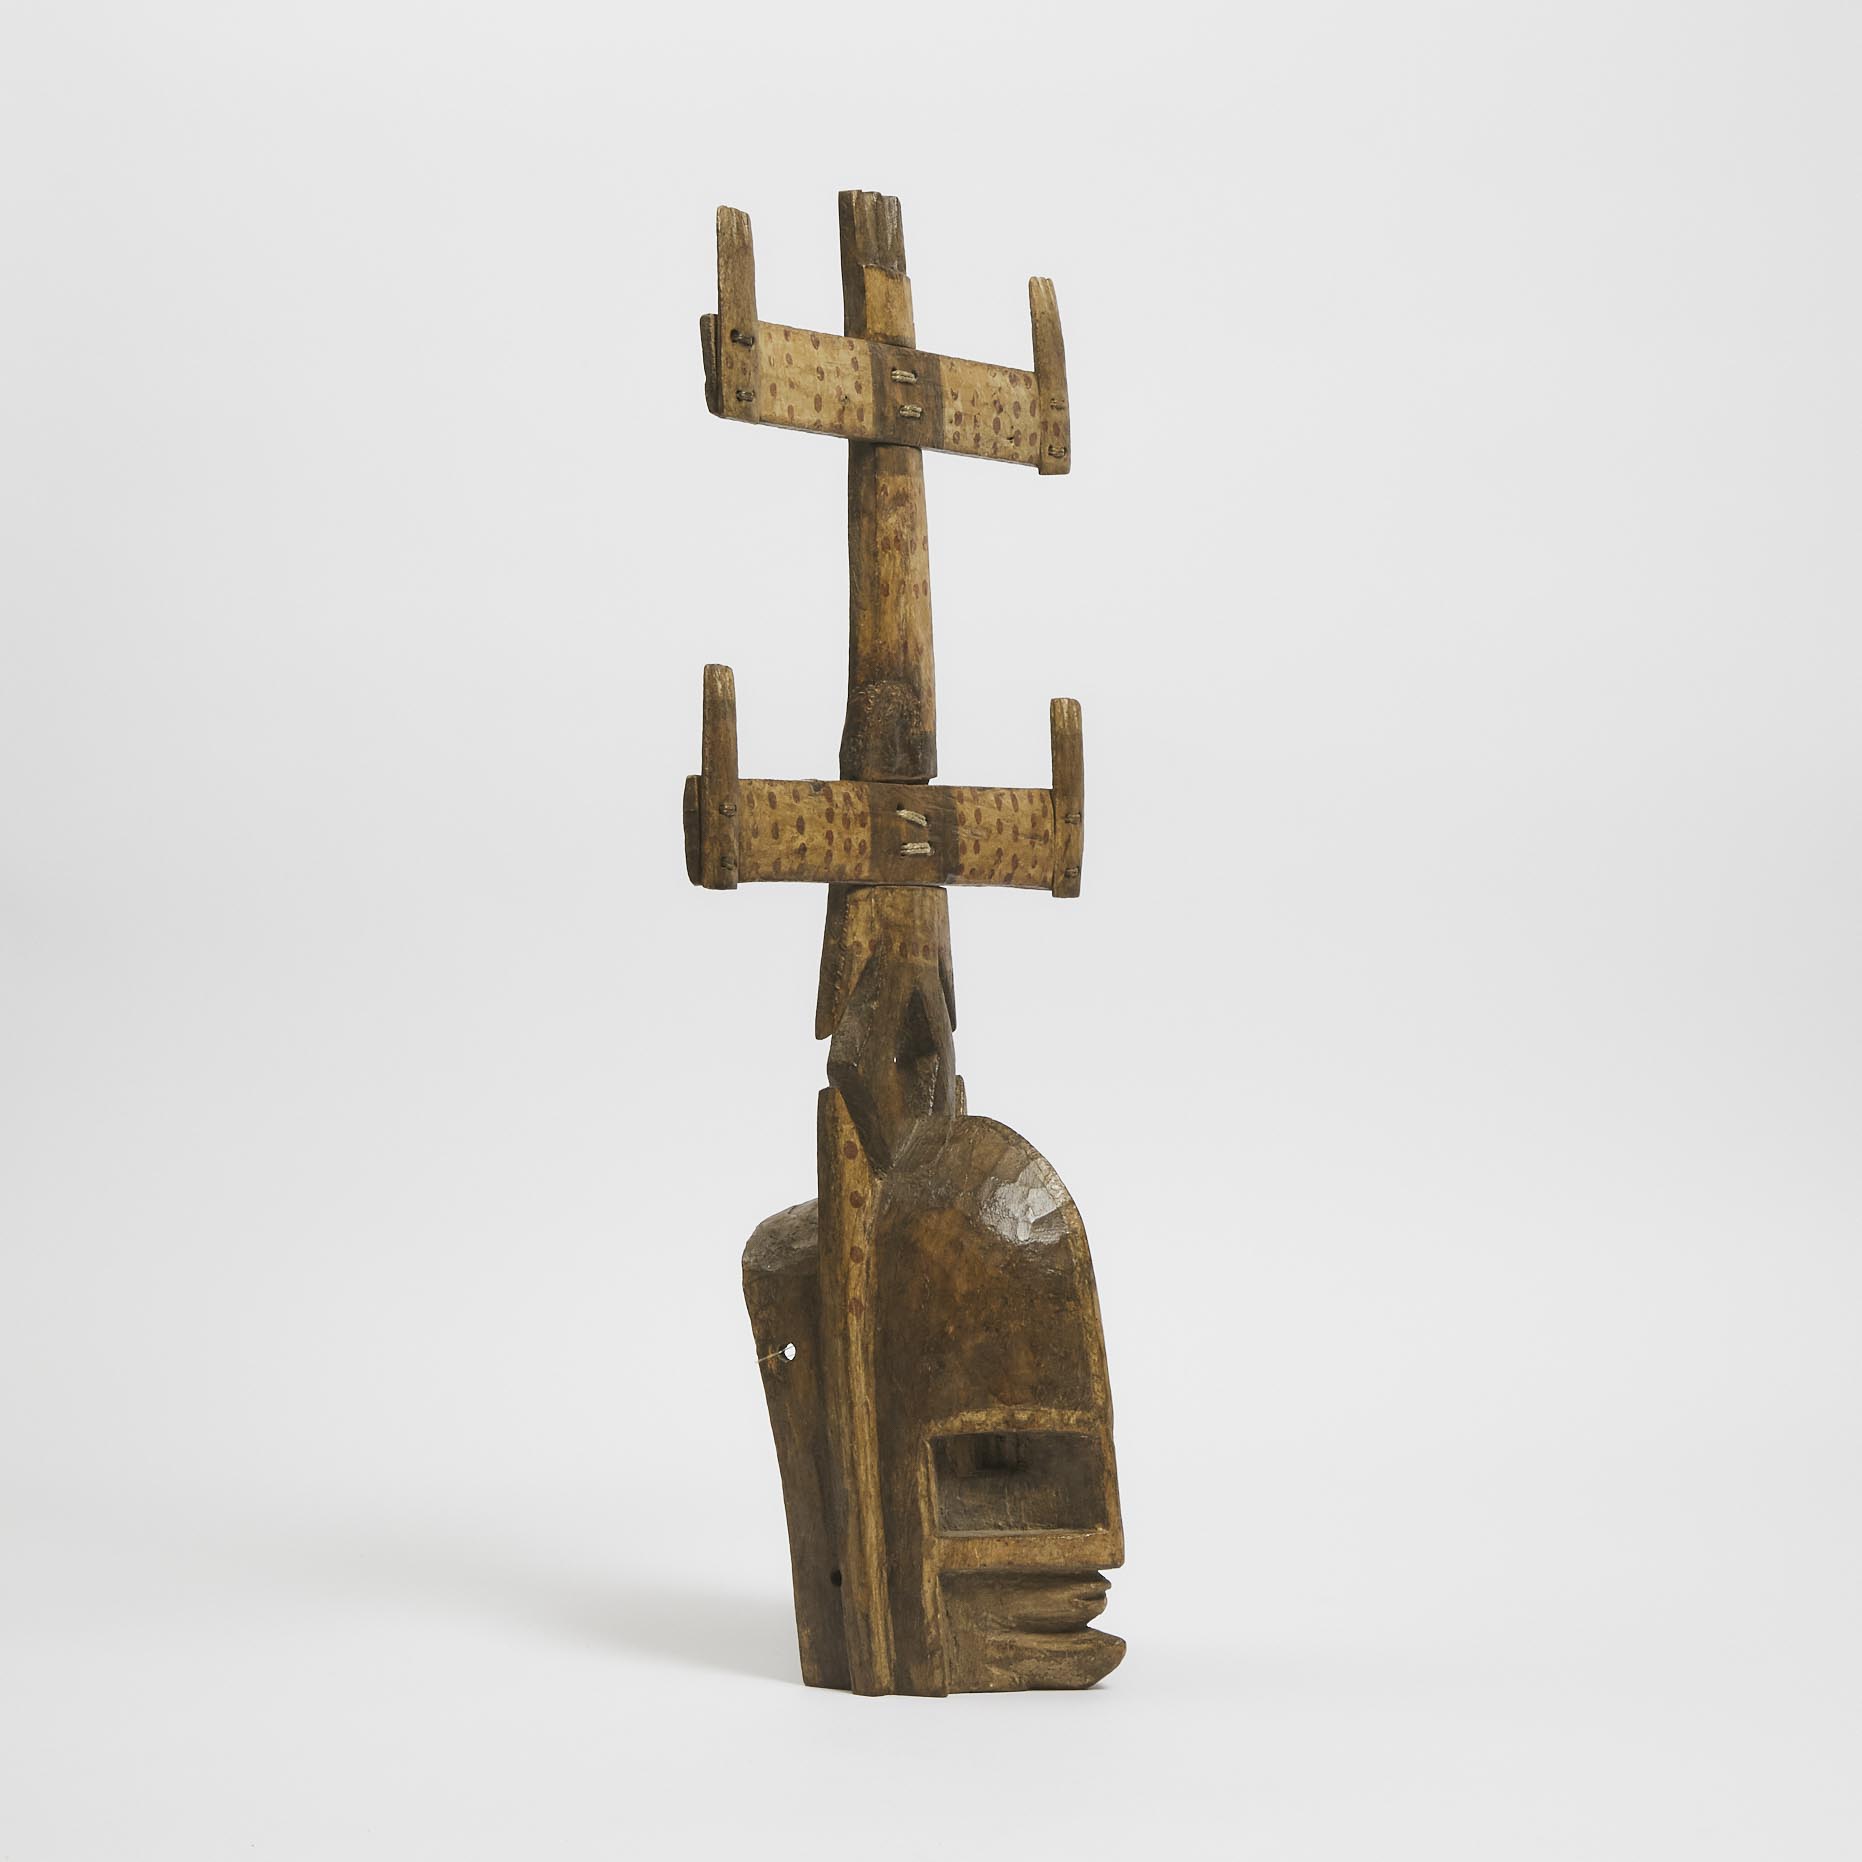 Dogon Kanaga Mask, Mali, West Africa, late 19th to early 20th century